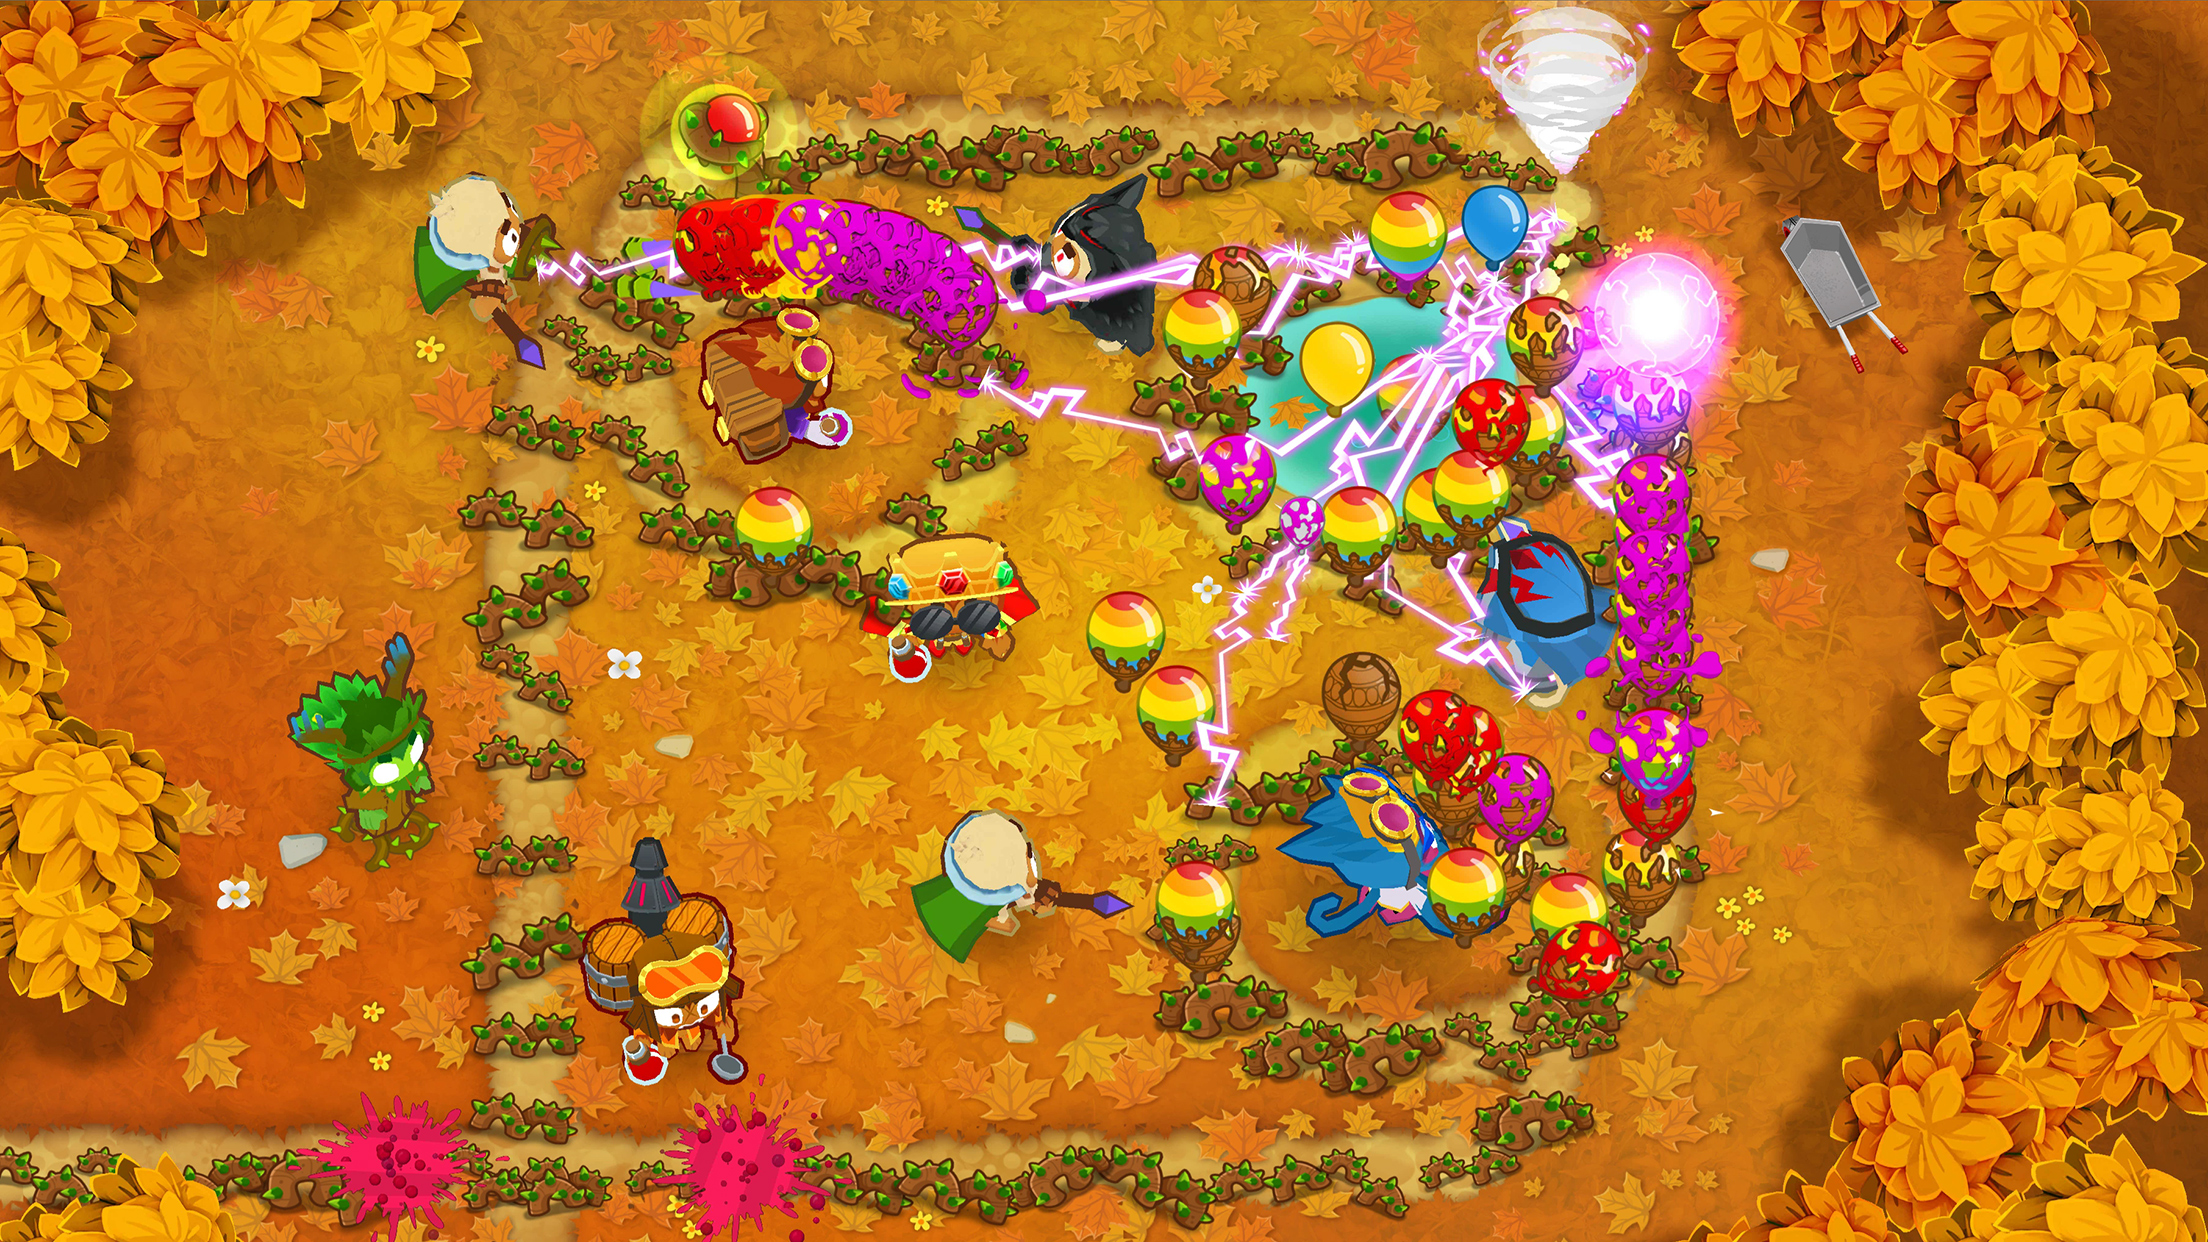 Bloons TD 6 Free Download for PC